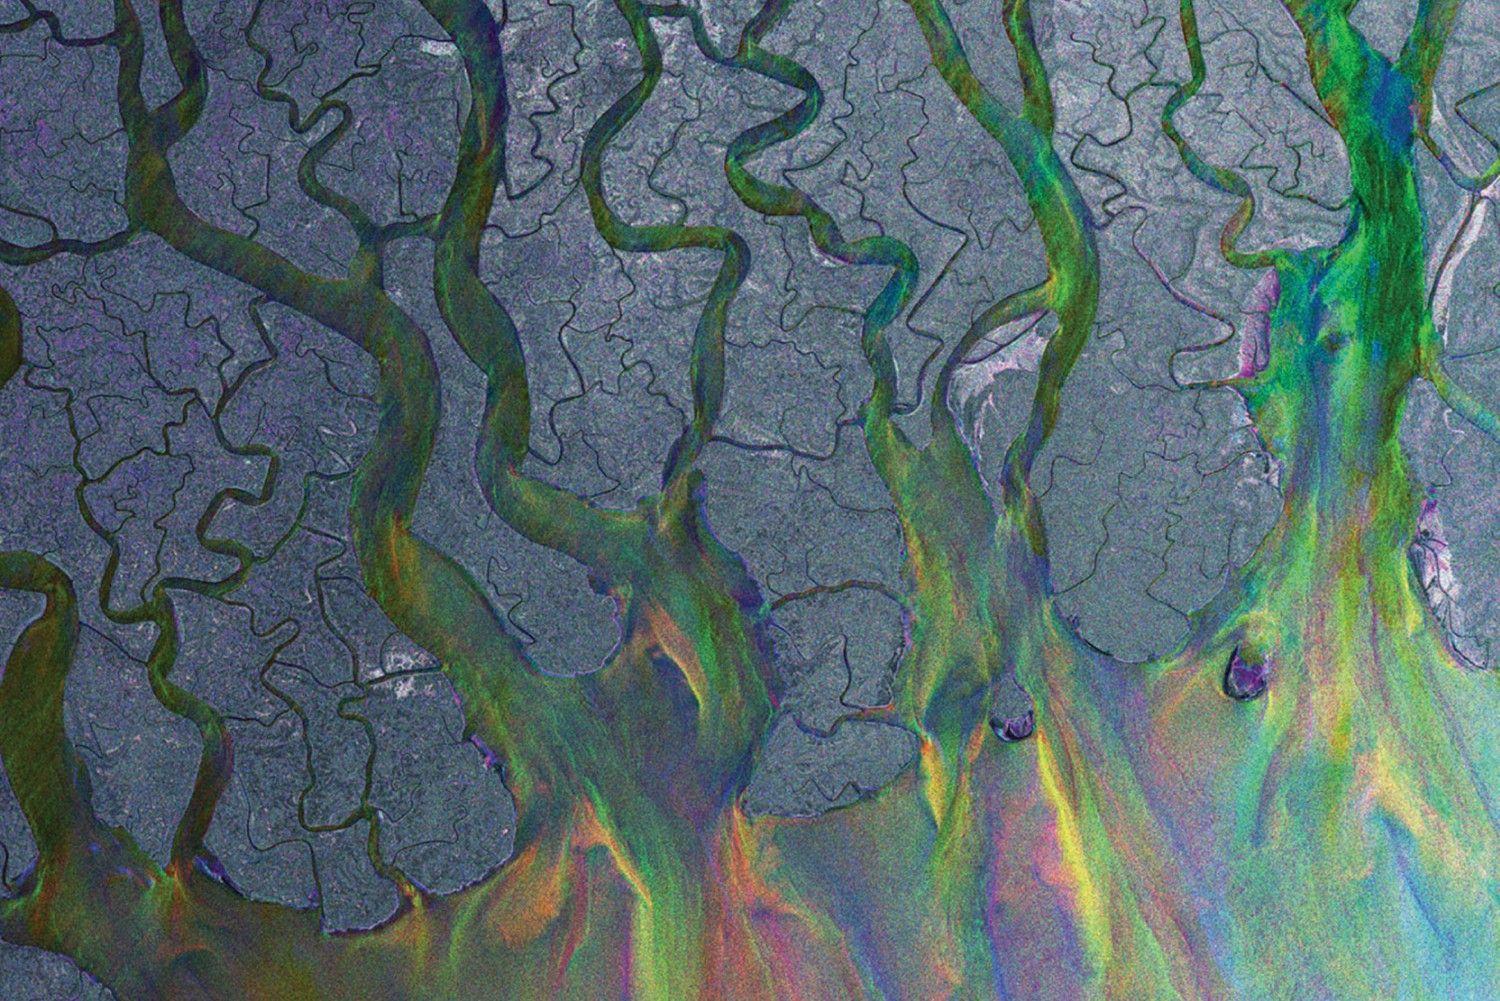 Stream Alt J New Album 'This Is All Yours' On Spotify